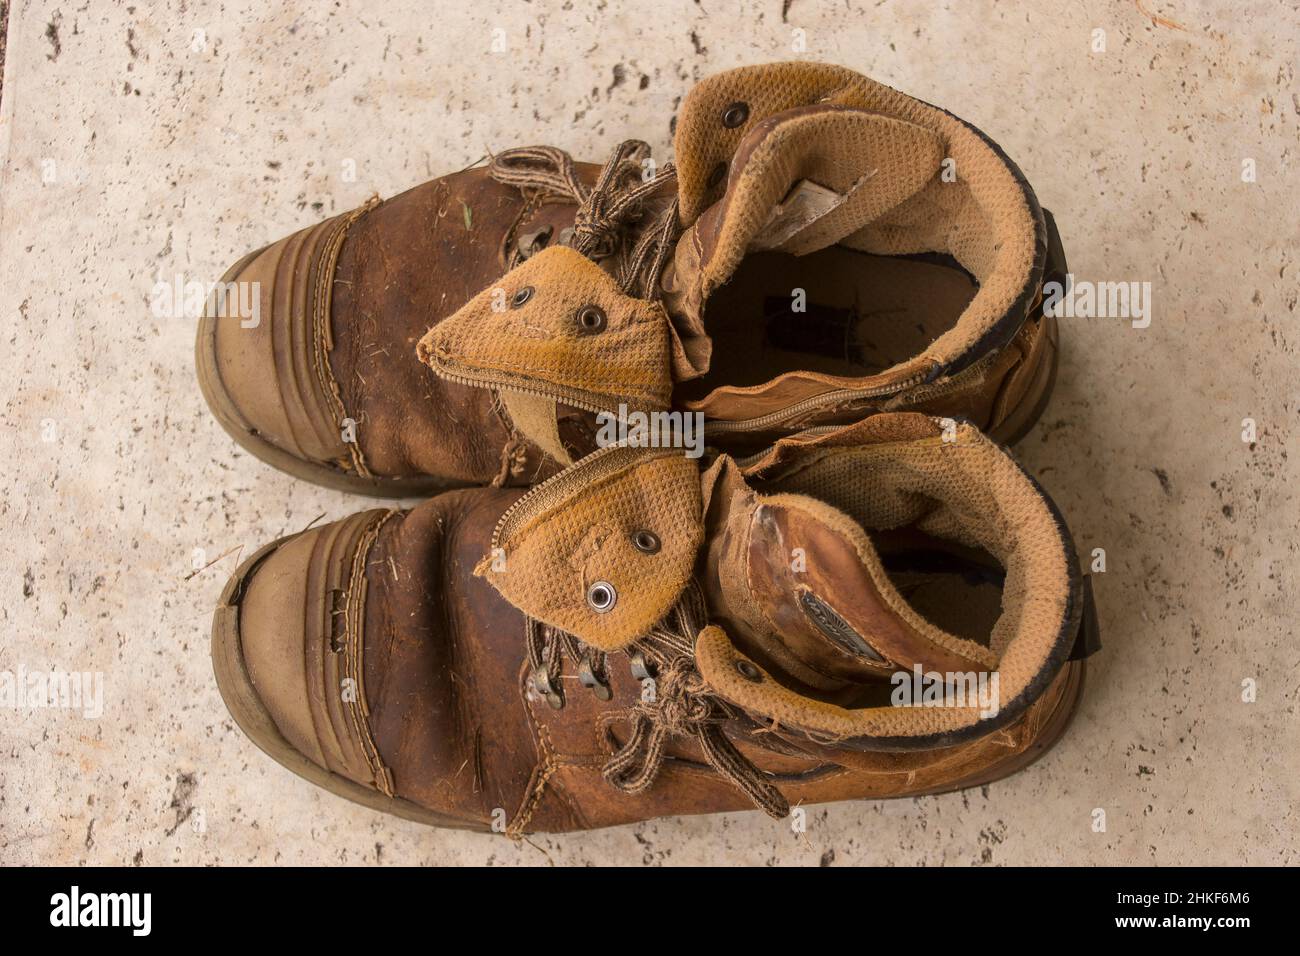 Pair of men's brown work boots - worn out splits and holes beyond repair. From above, on pavement. Queensland Australia. Stock Photo